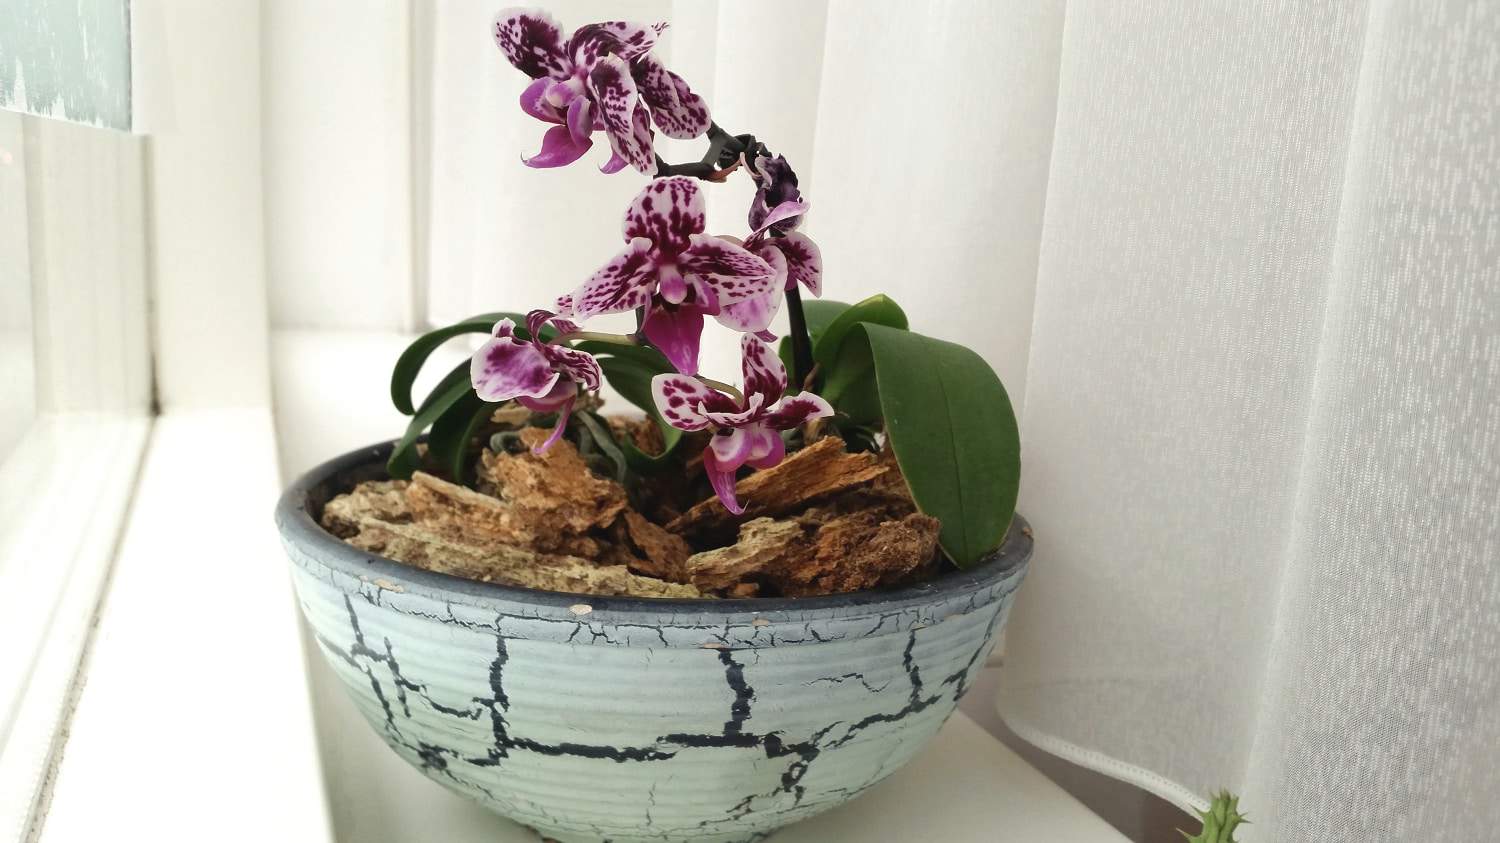 Mottled light pink and dark purple mini Phalaenopsis orchid flowers Guide to caring for Phalaenopsis orchids